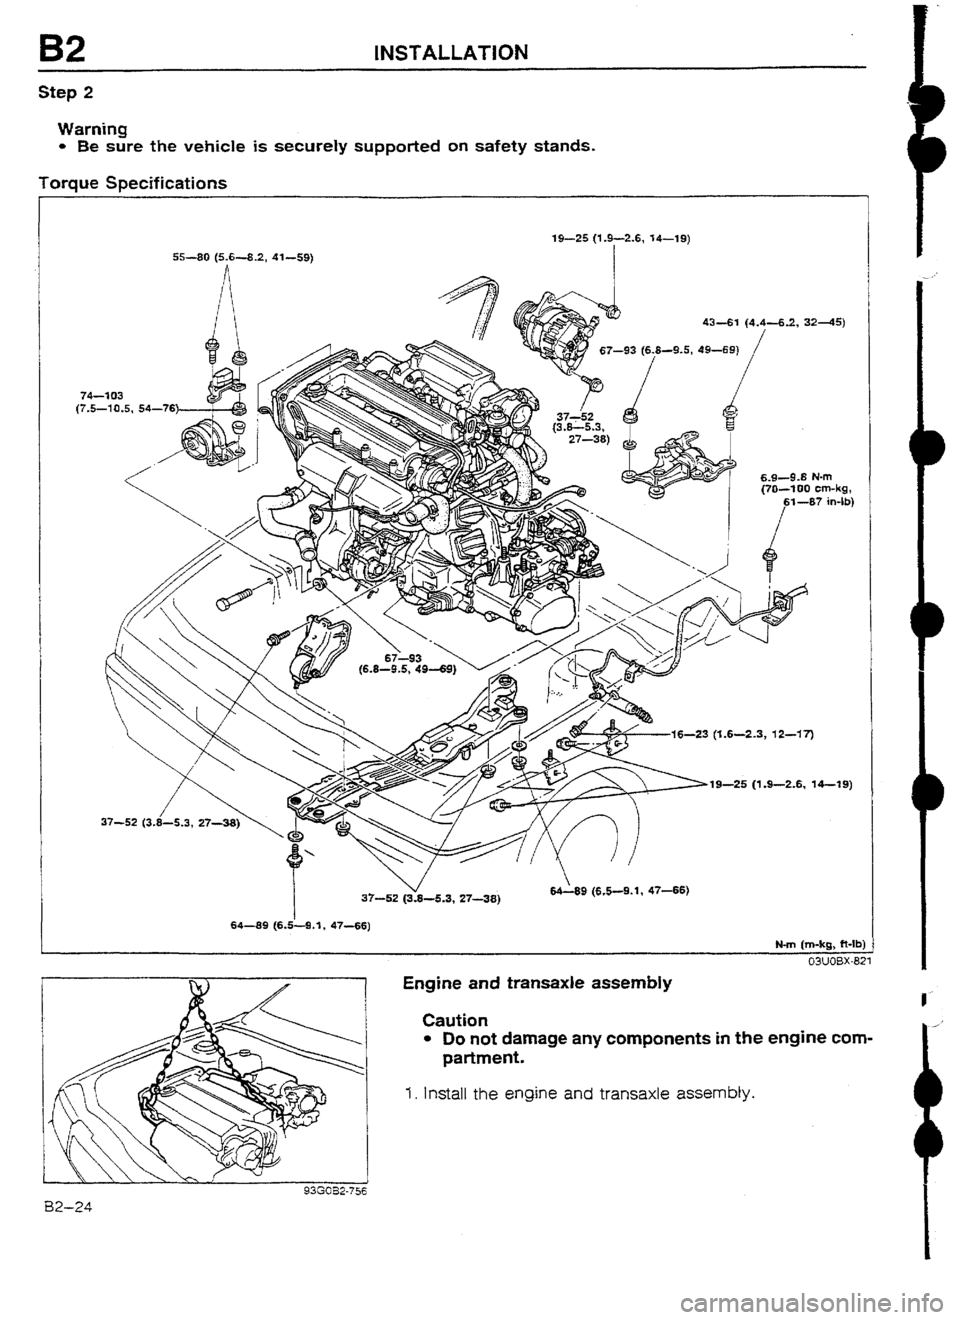 MAZDA 232 1990  Workshop Manual Suplement B2 INSTALLATION 
Step 2 
Warning 
l Be sure the vehicle is securely supported on safety stands. 
Torque Specifications 
19-S (1.9-2.6, 14-l 9) 
55-99 (5.6-8.2, 41-59) 
I 
74-2 03 
(7,5-10.5, 54-76 
6.